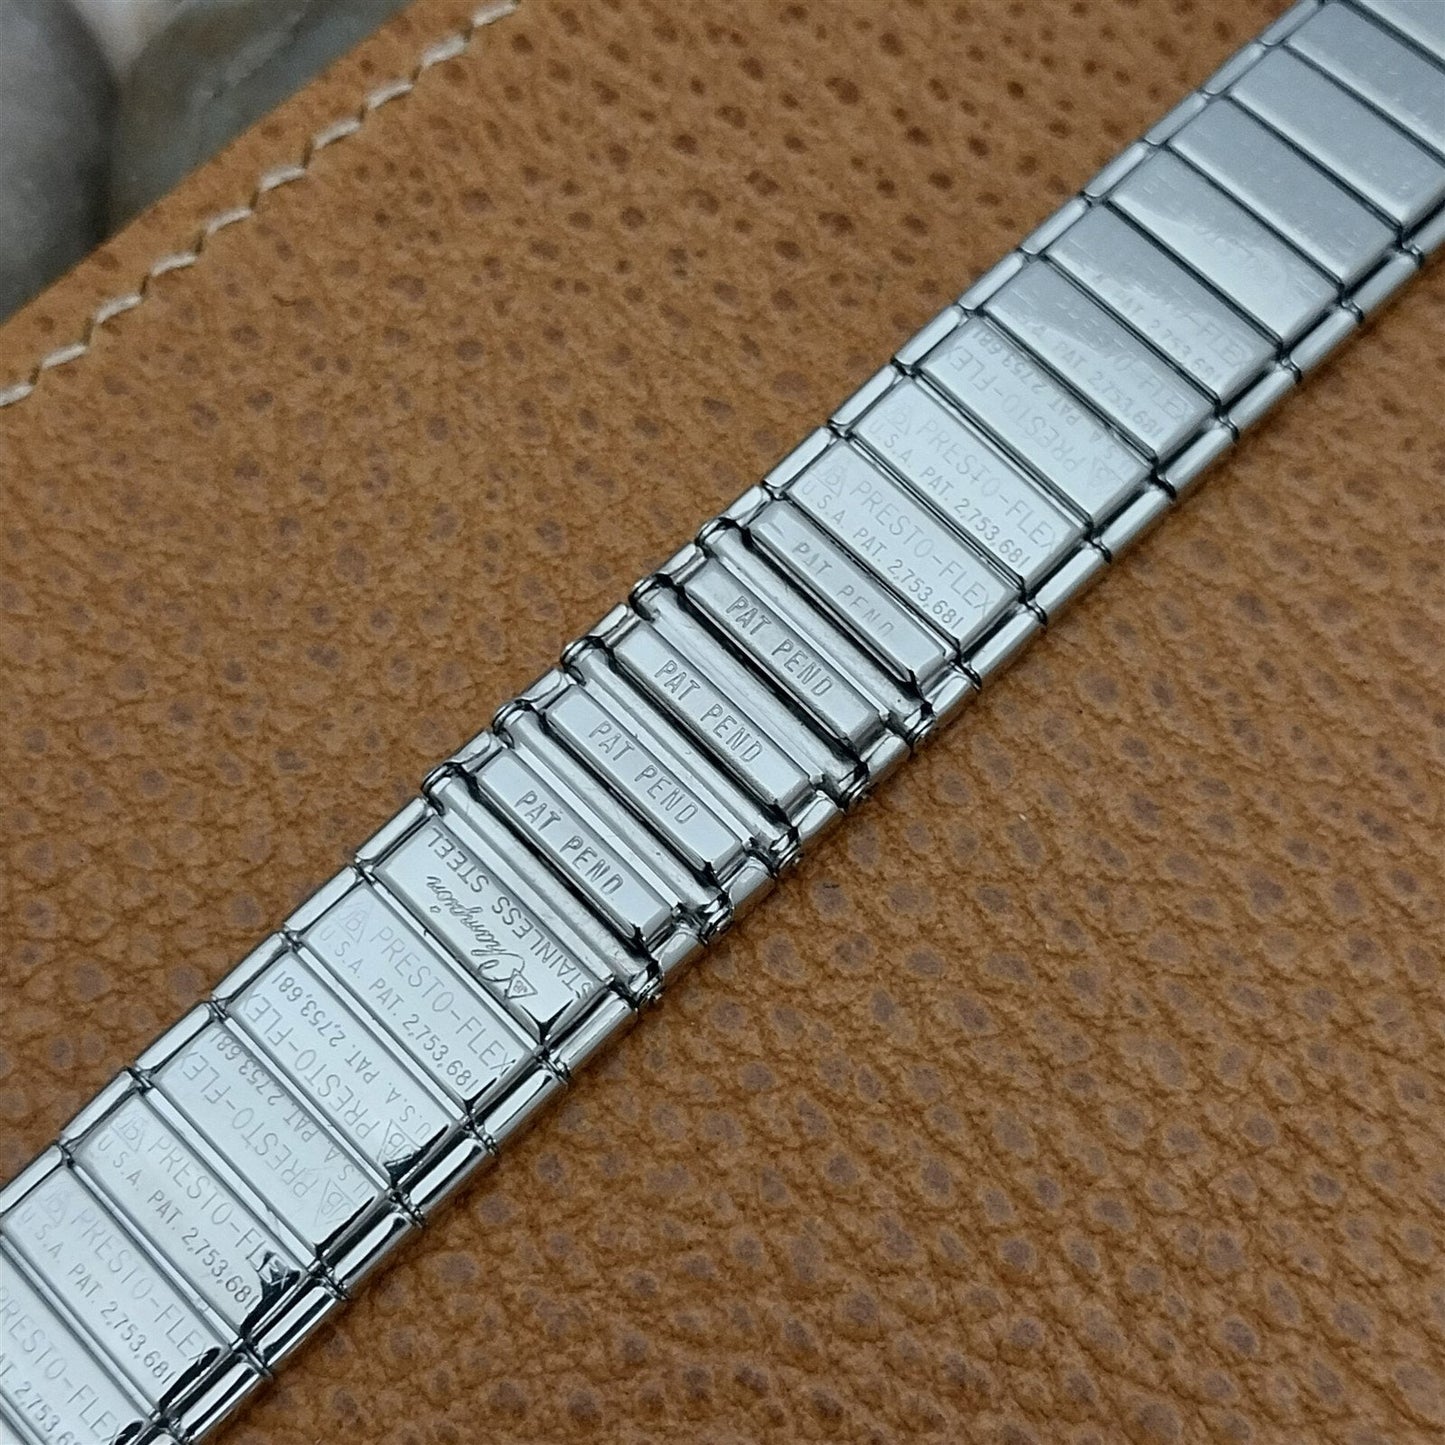 17mm 18mm 19mm Stainless Steel Expansion JB Champion 1960s Vintage Watch Band